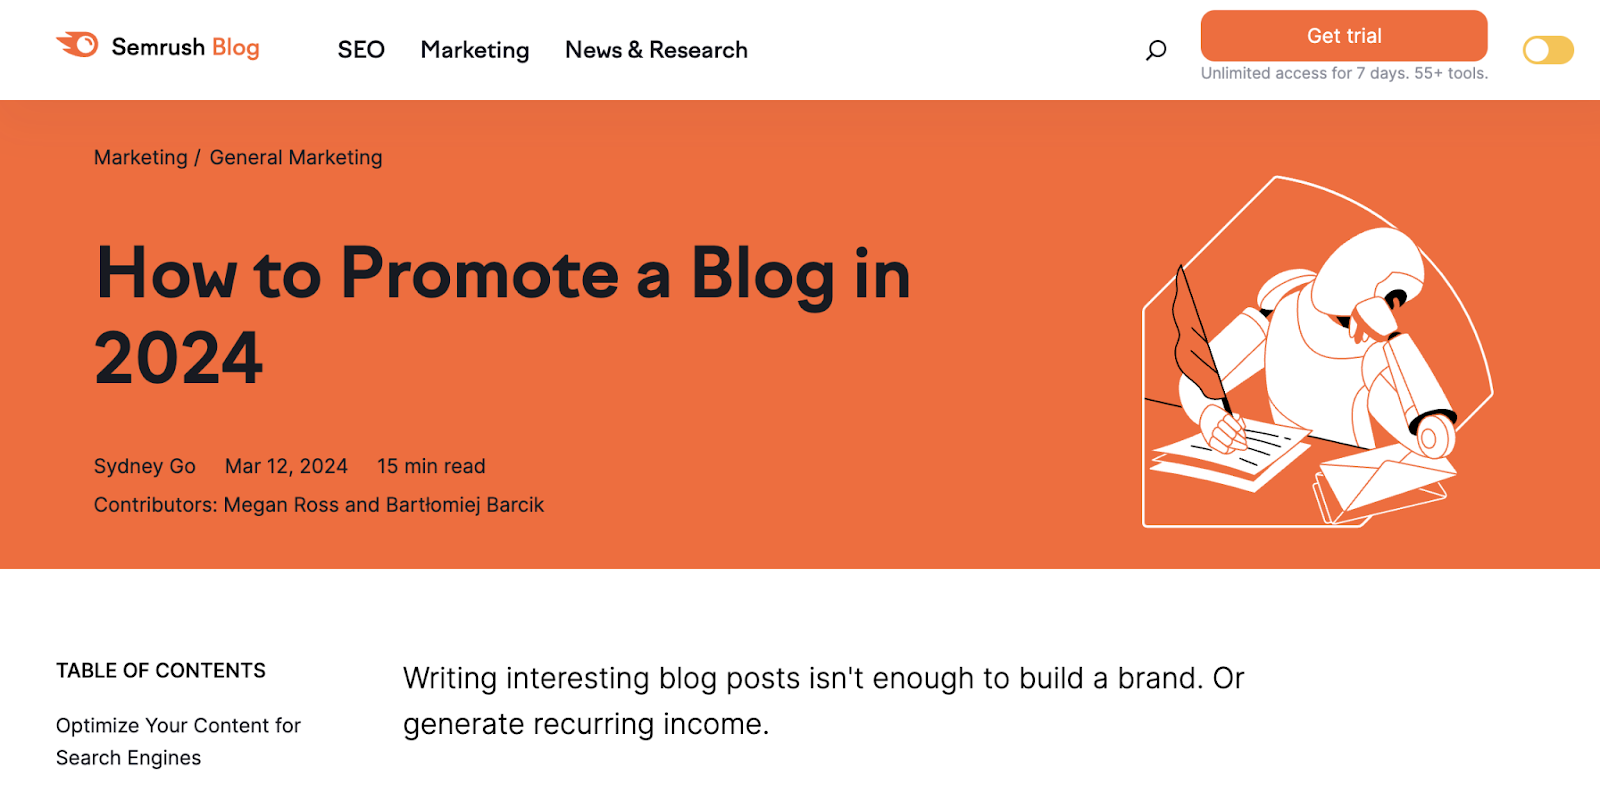 Semrush's blog rubric  "How to Promote a Blog successful  2024"